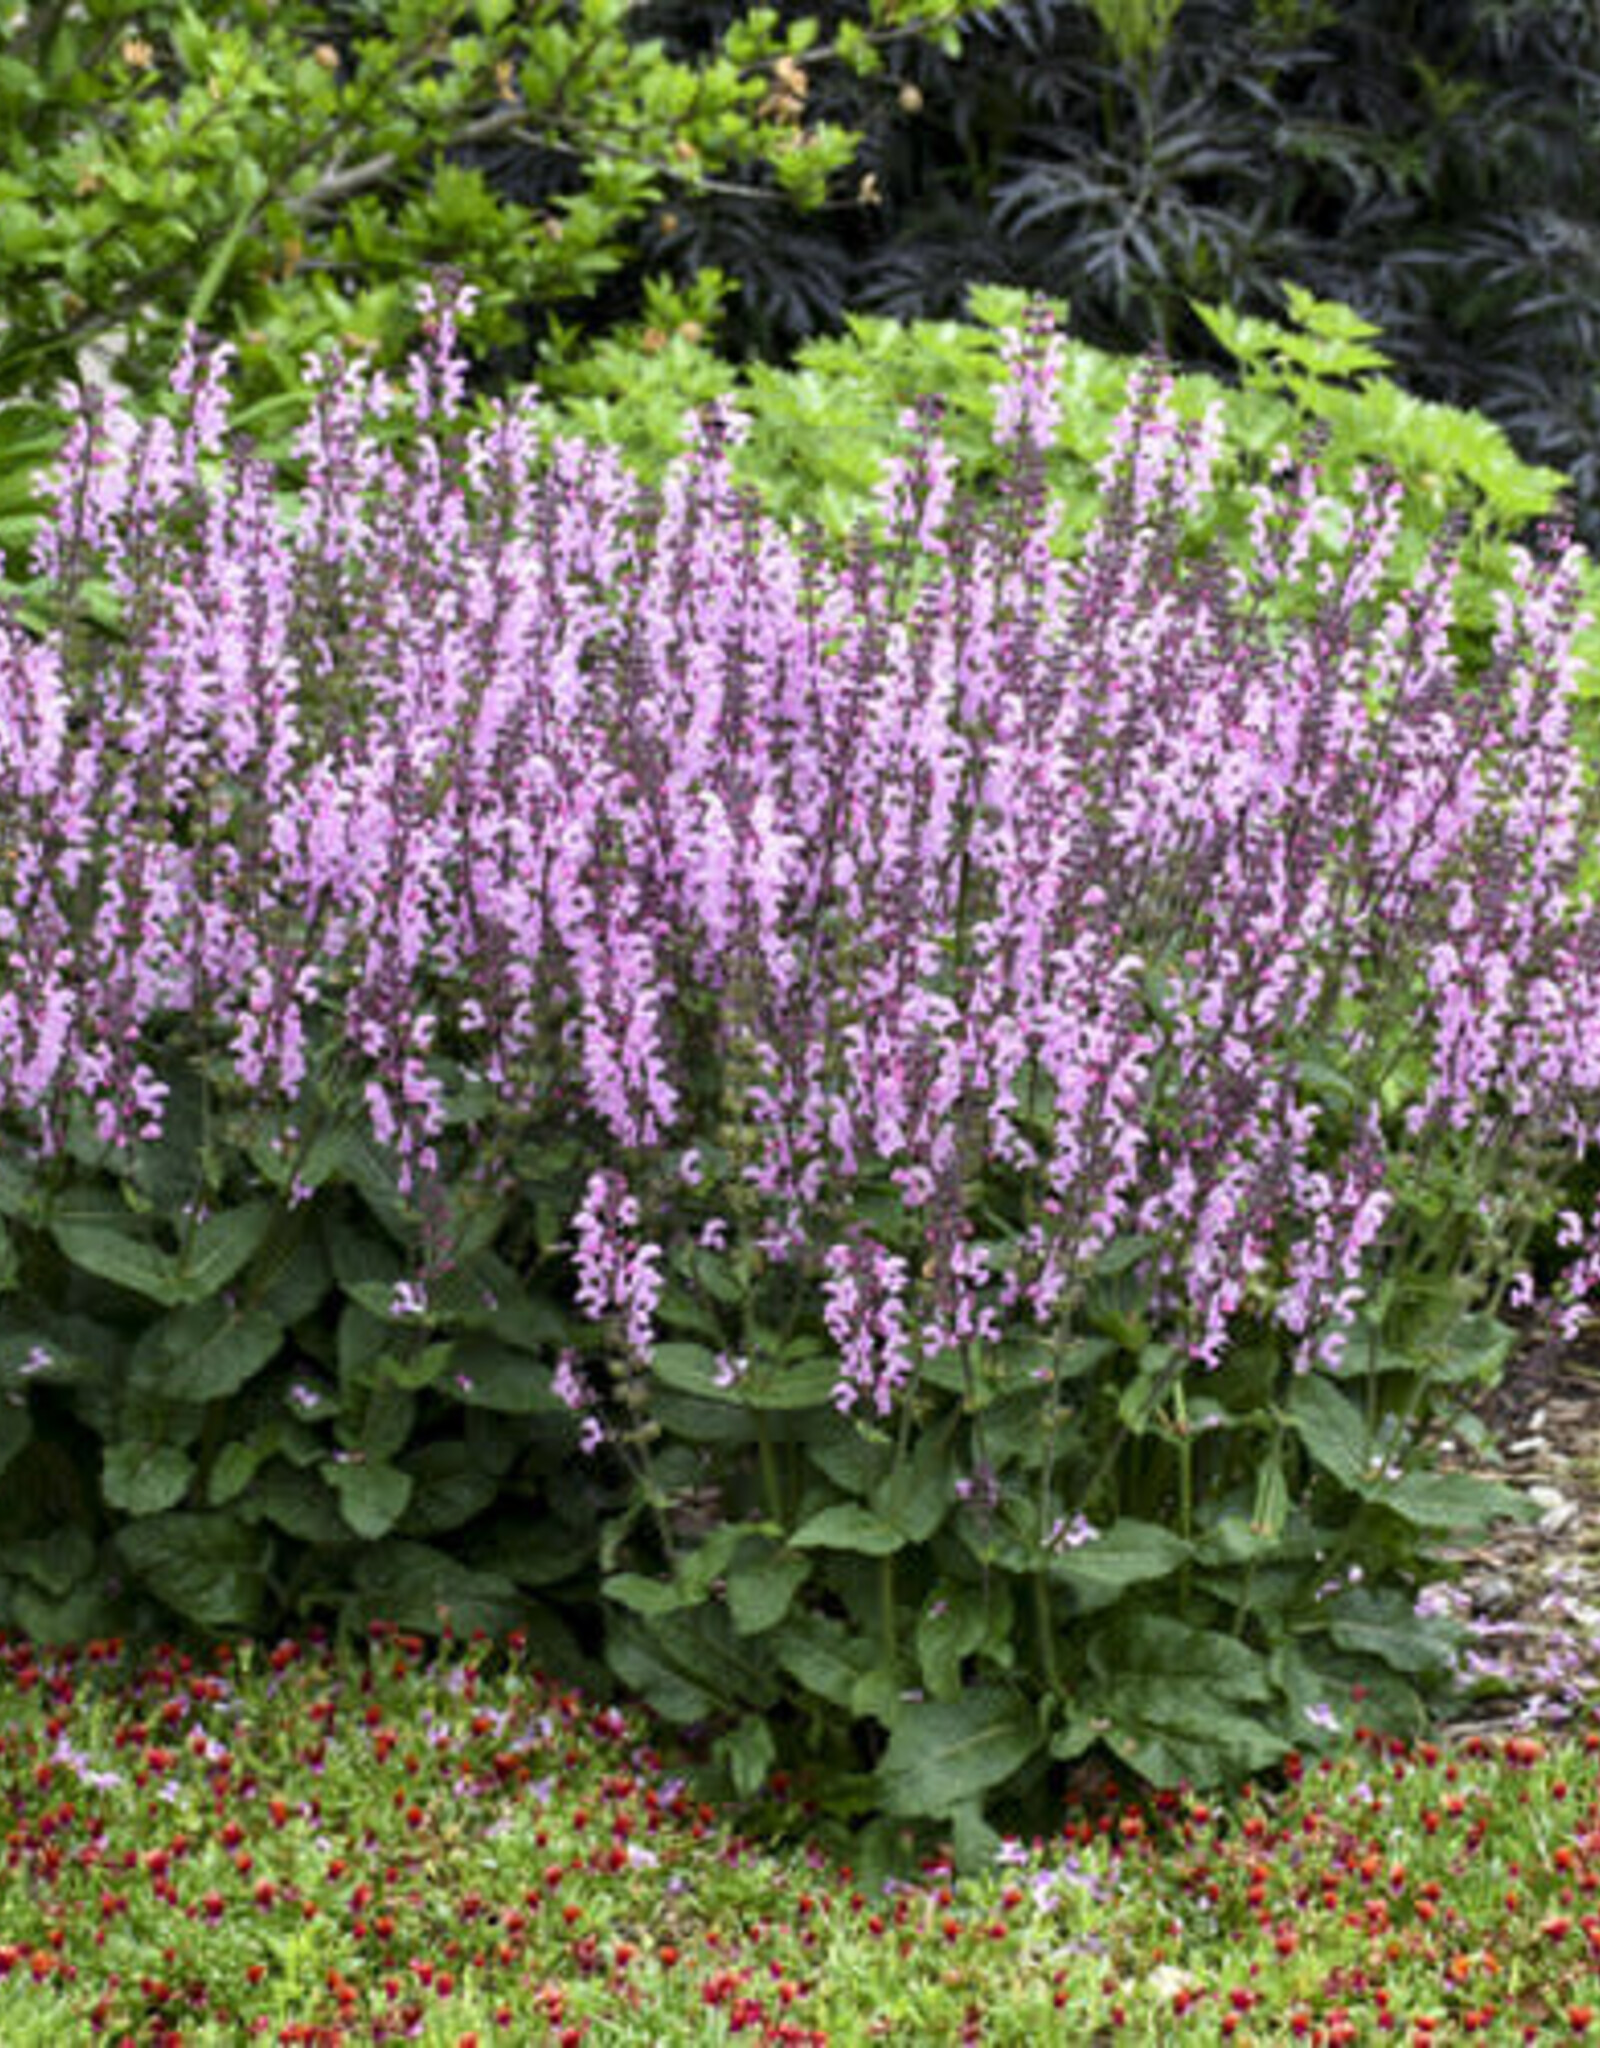 Proven Winners Salvia Color Spires Pink Dawn 1 gal